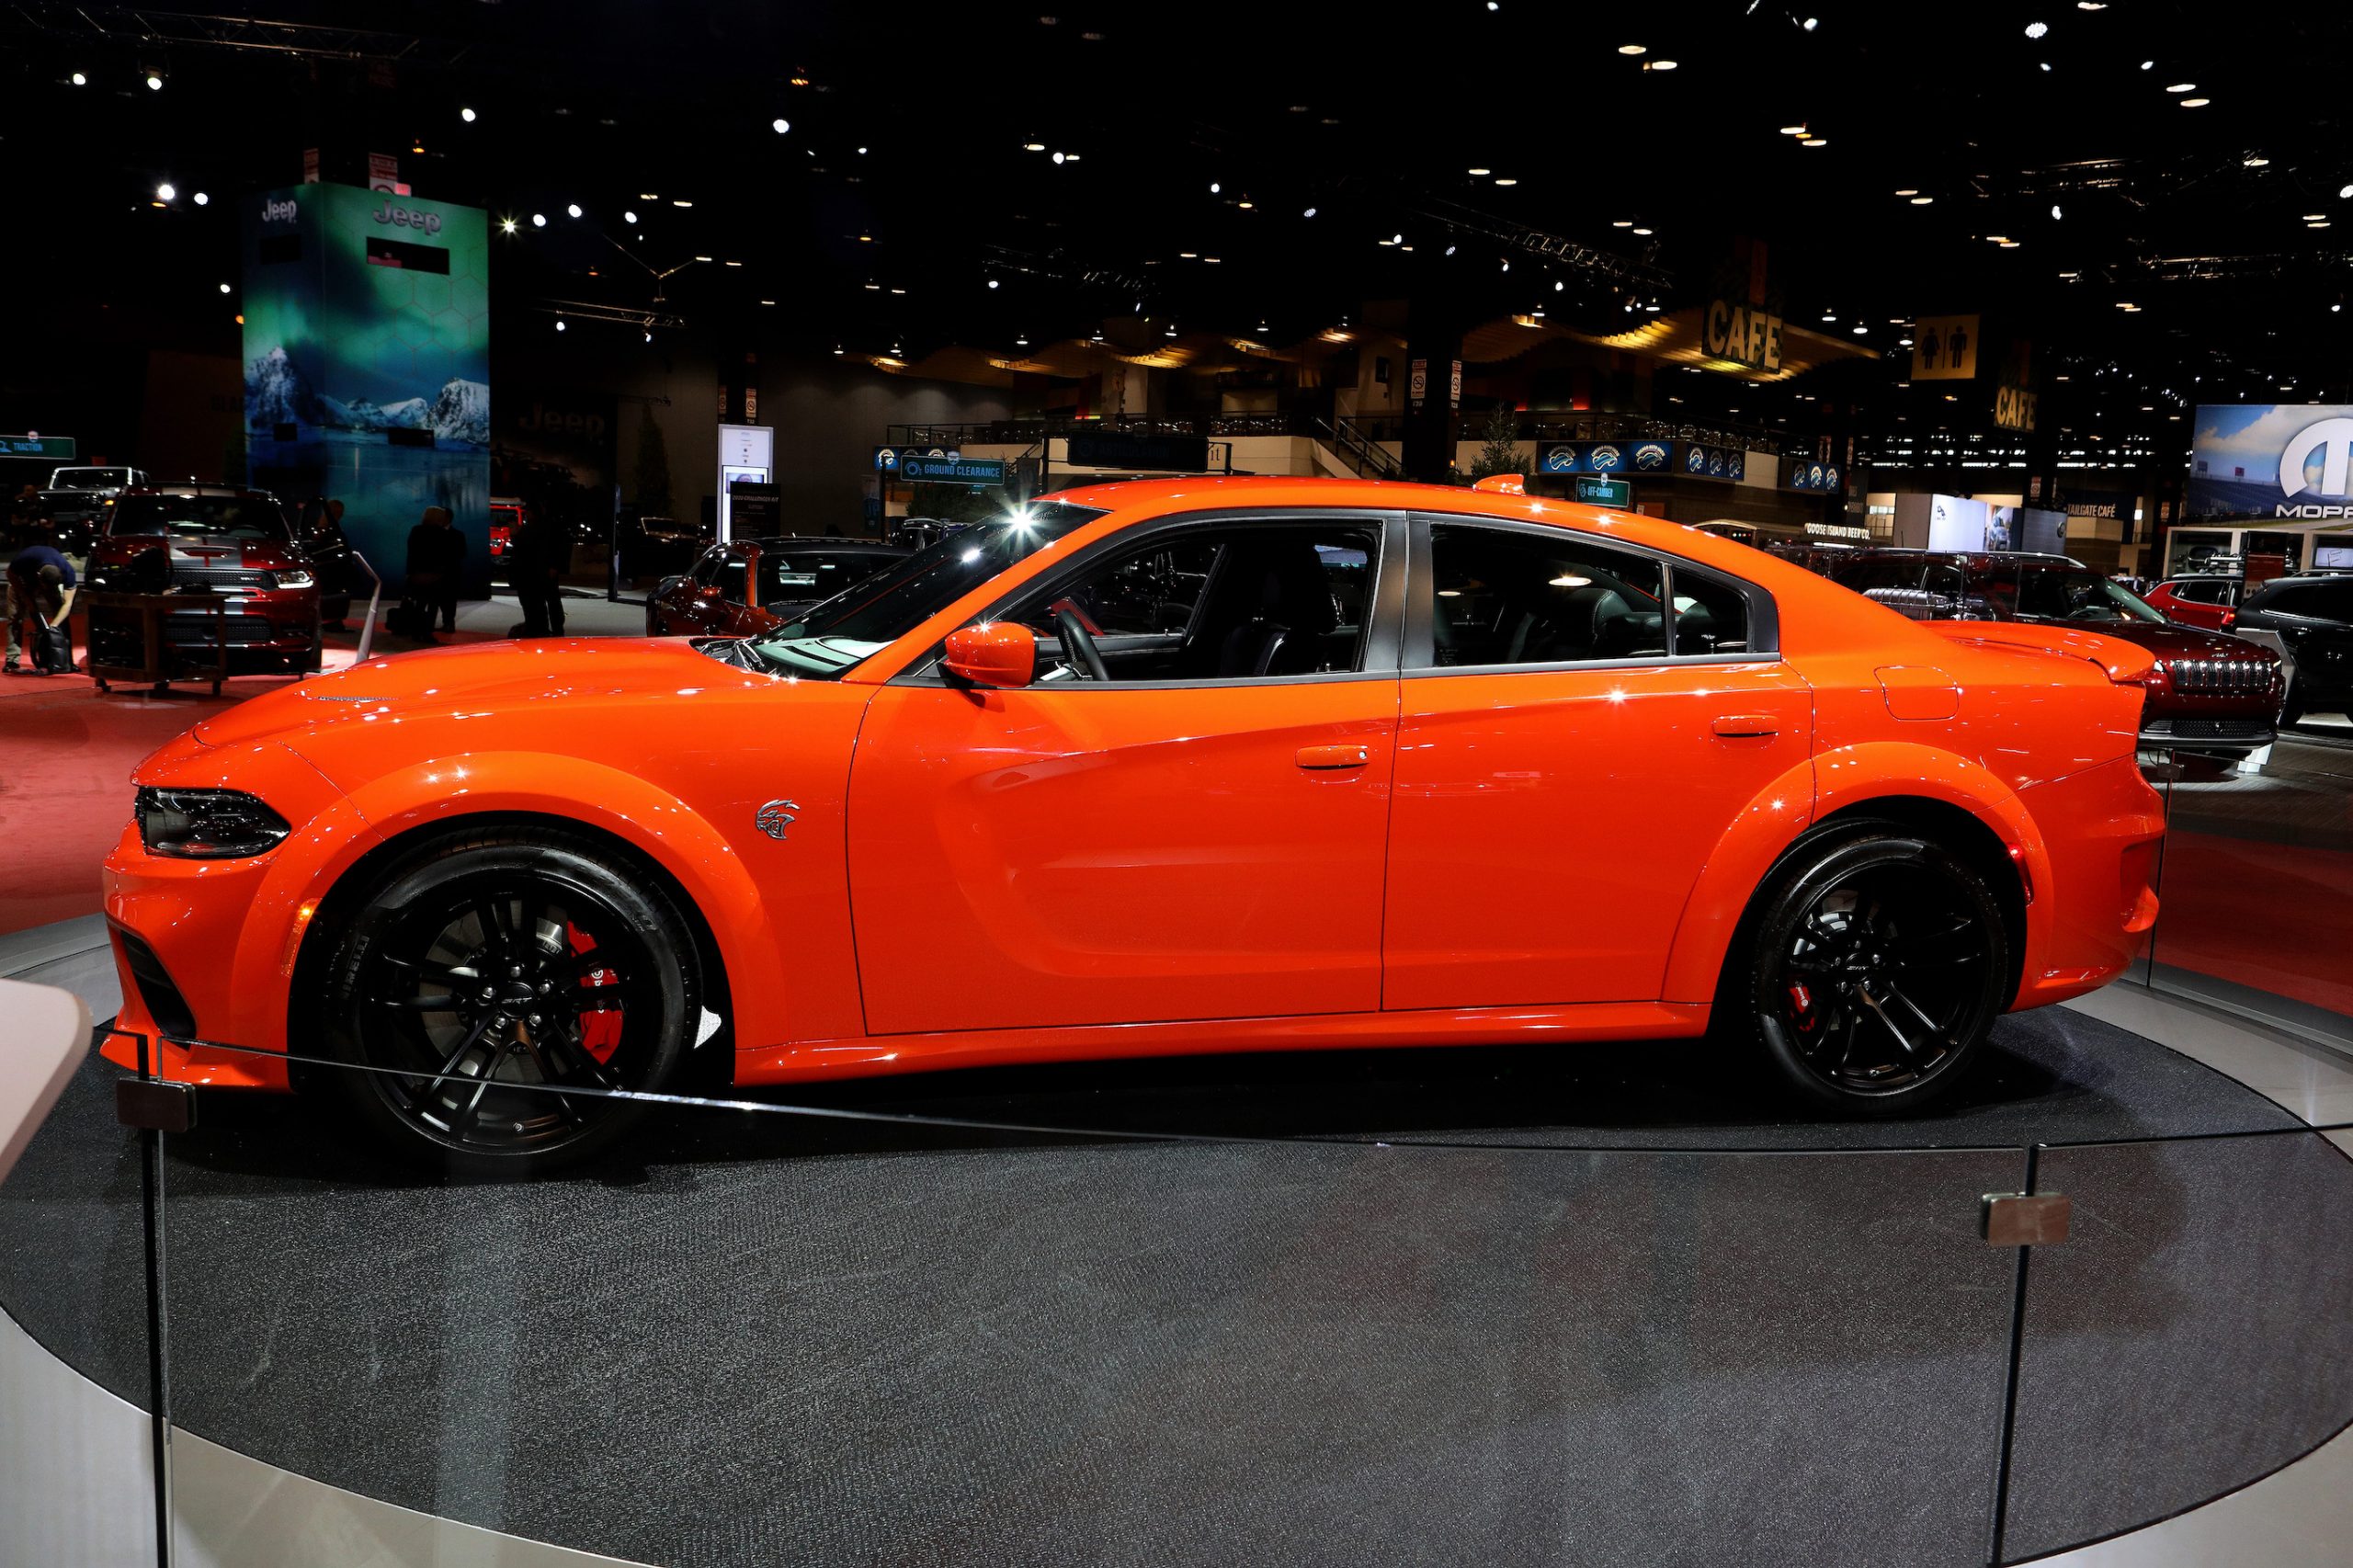 2020 Dodge Charger SXT is on display at the 112th Annual Chicago Auto Show at McCormick Place